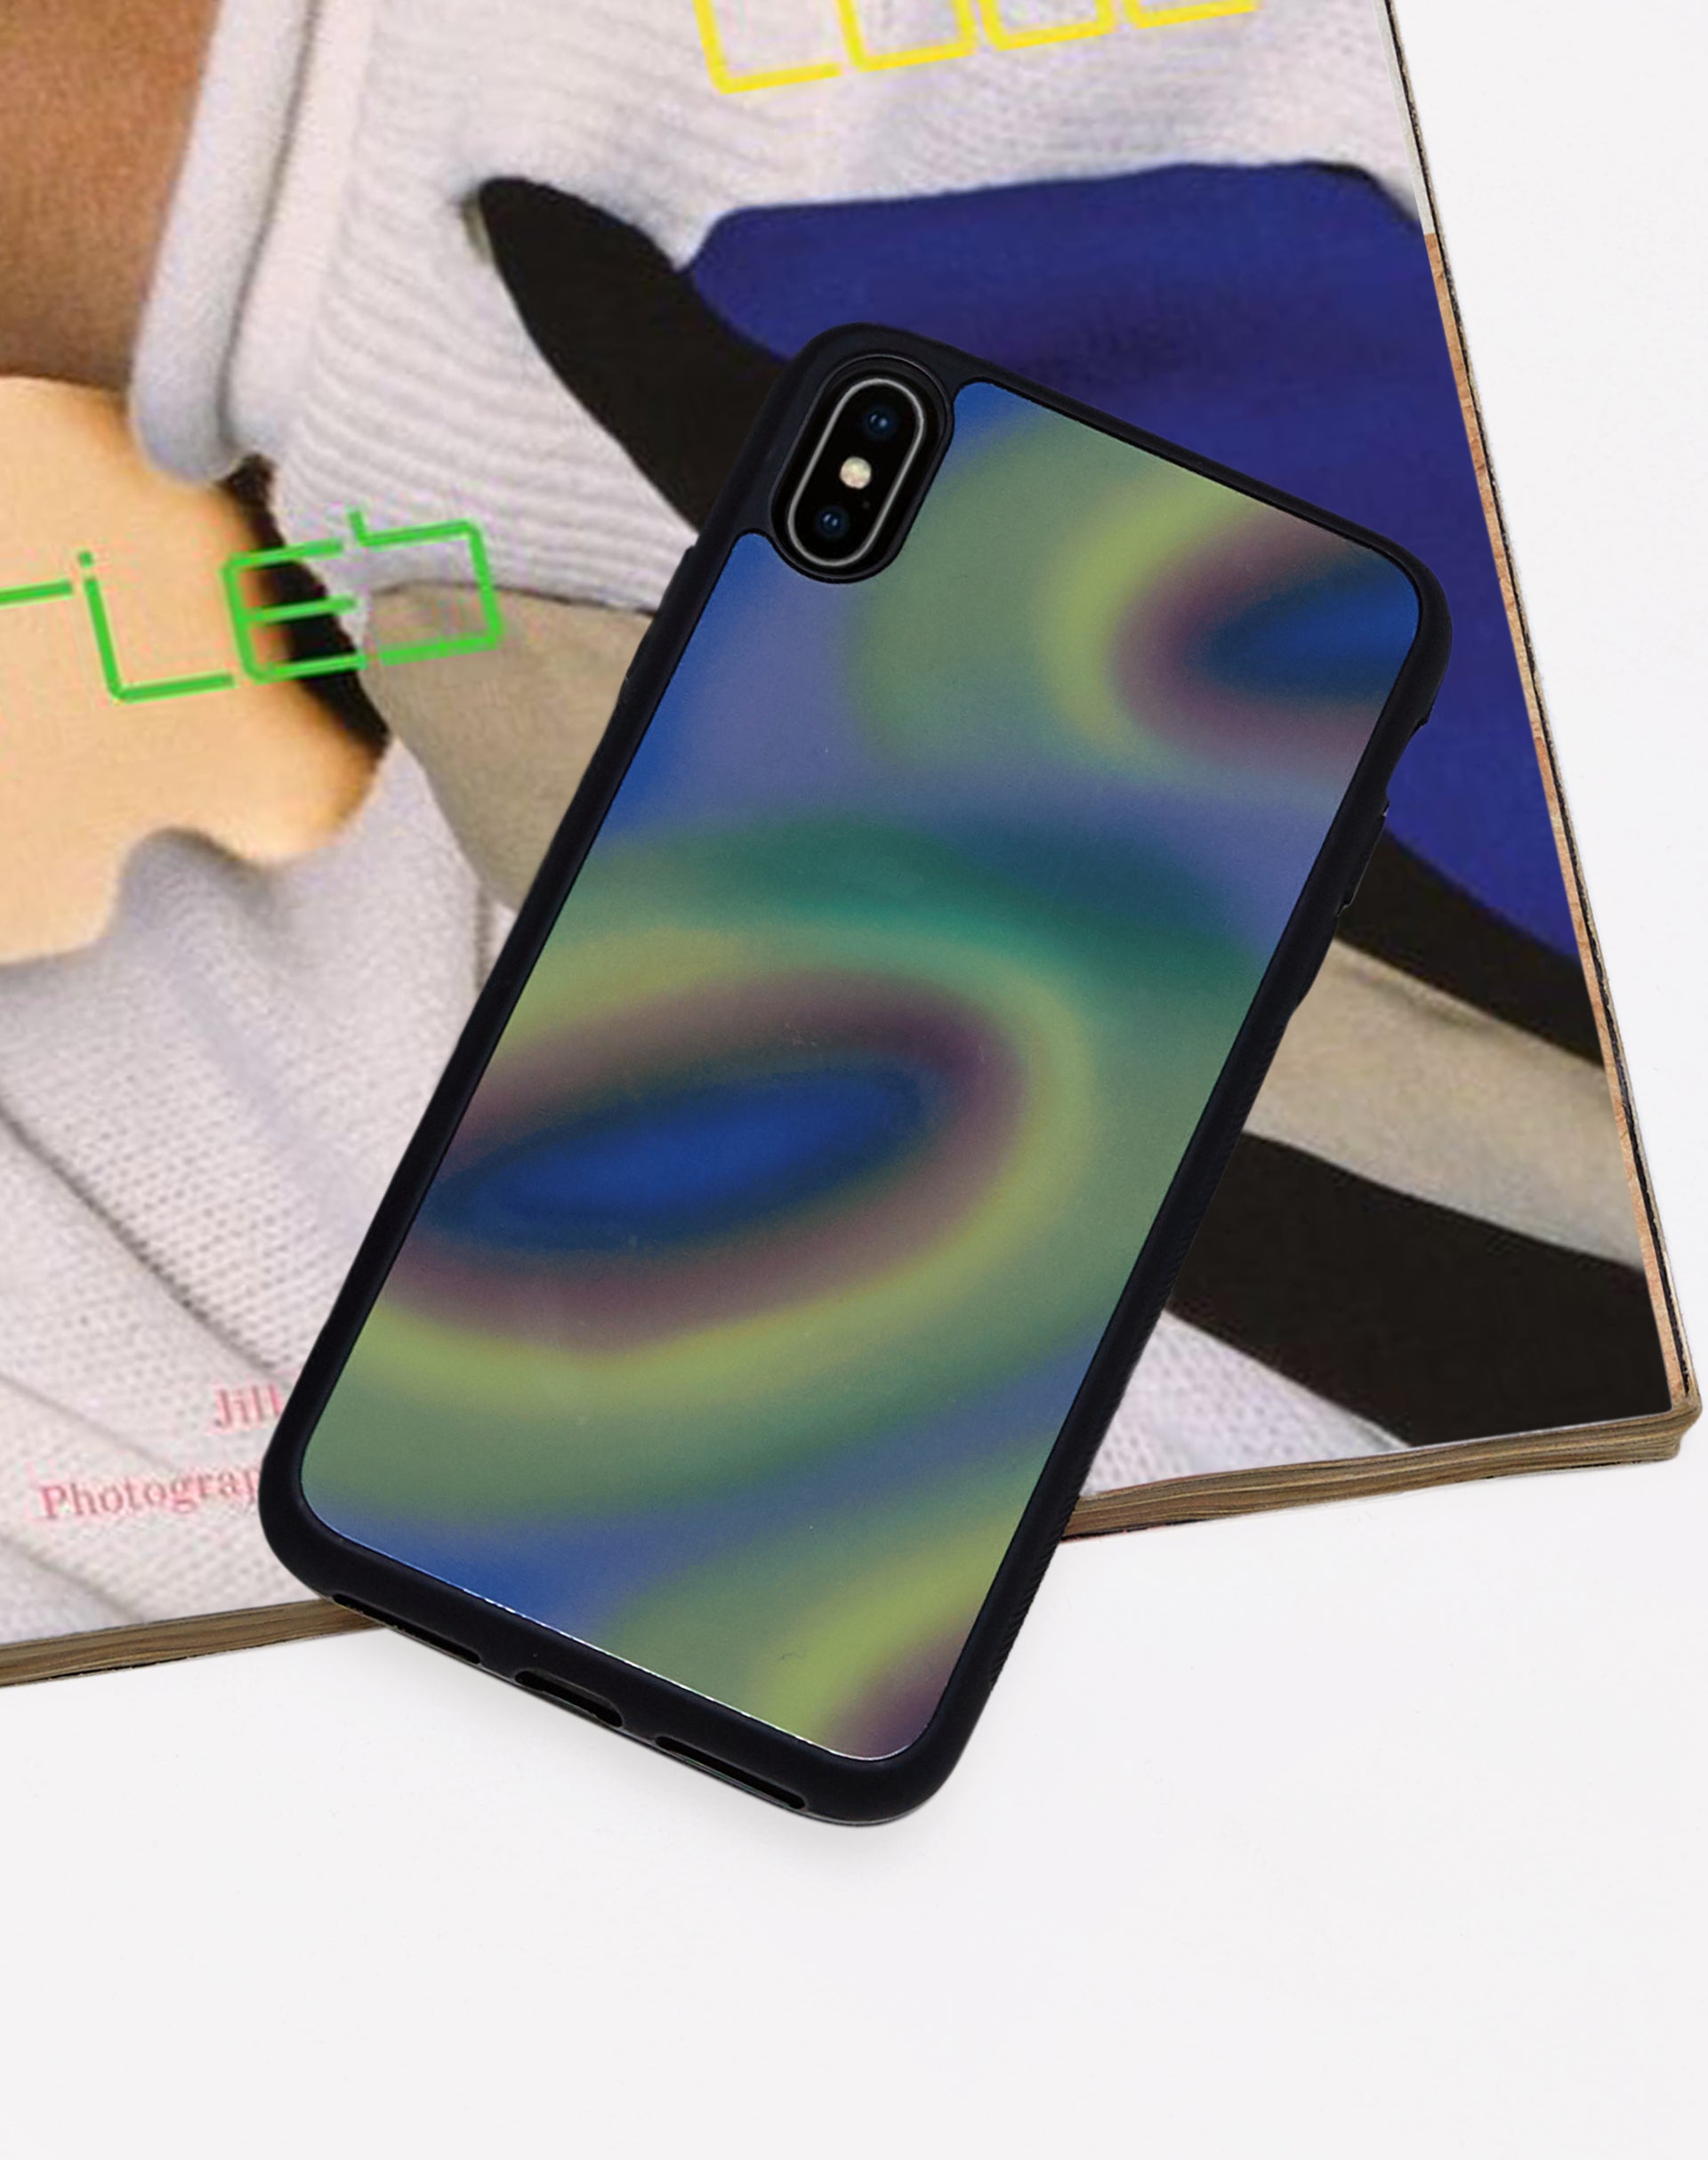 Image of MOTEL X OLIVIA NEILL Iphone Case in Triple Orb Blue and Green